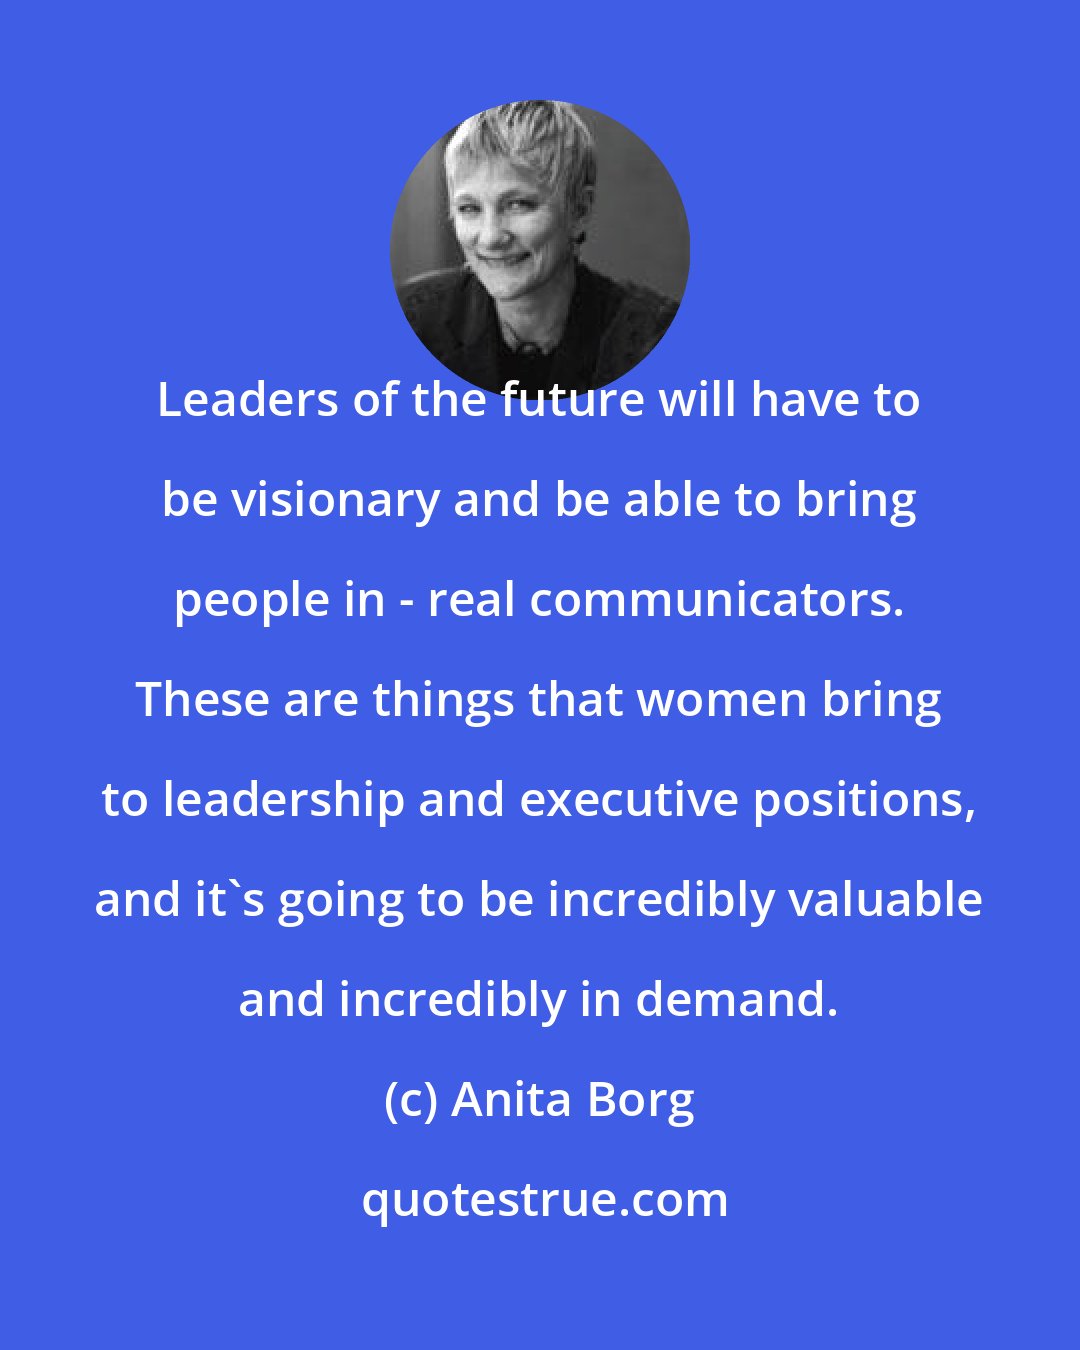 Anita Borg: Leaders of the future will have to be visionary and be able to bring people in - real communicators. These are things that women bring to leadership and executive positions, and it's going to be incredibly valuable and incredibly in demand.